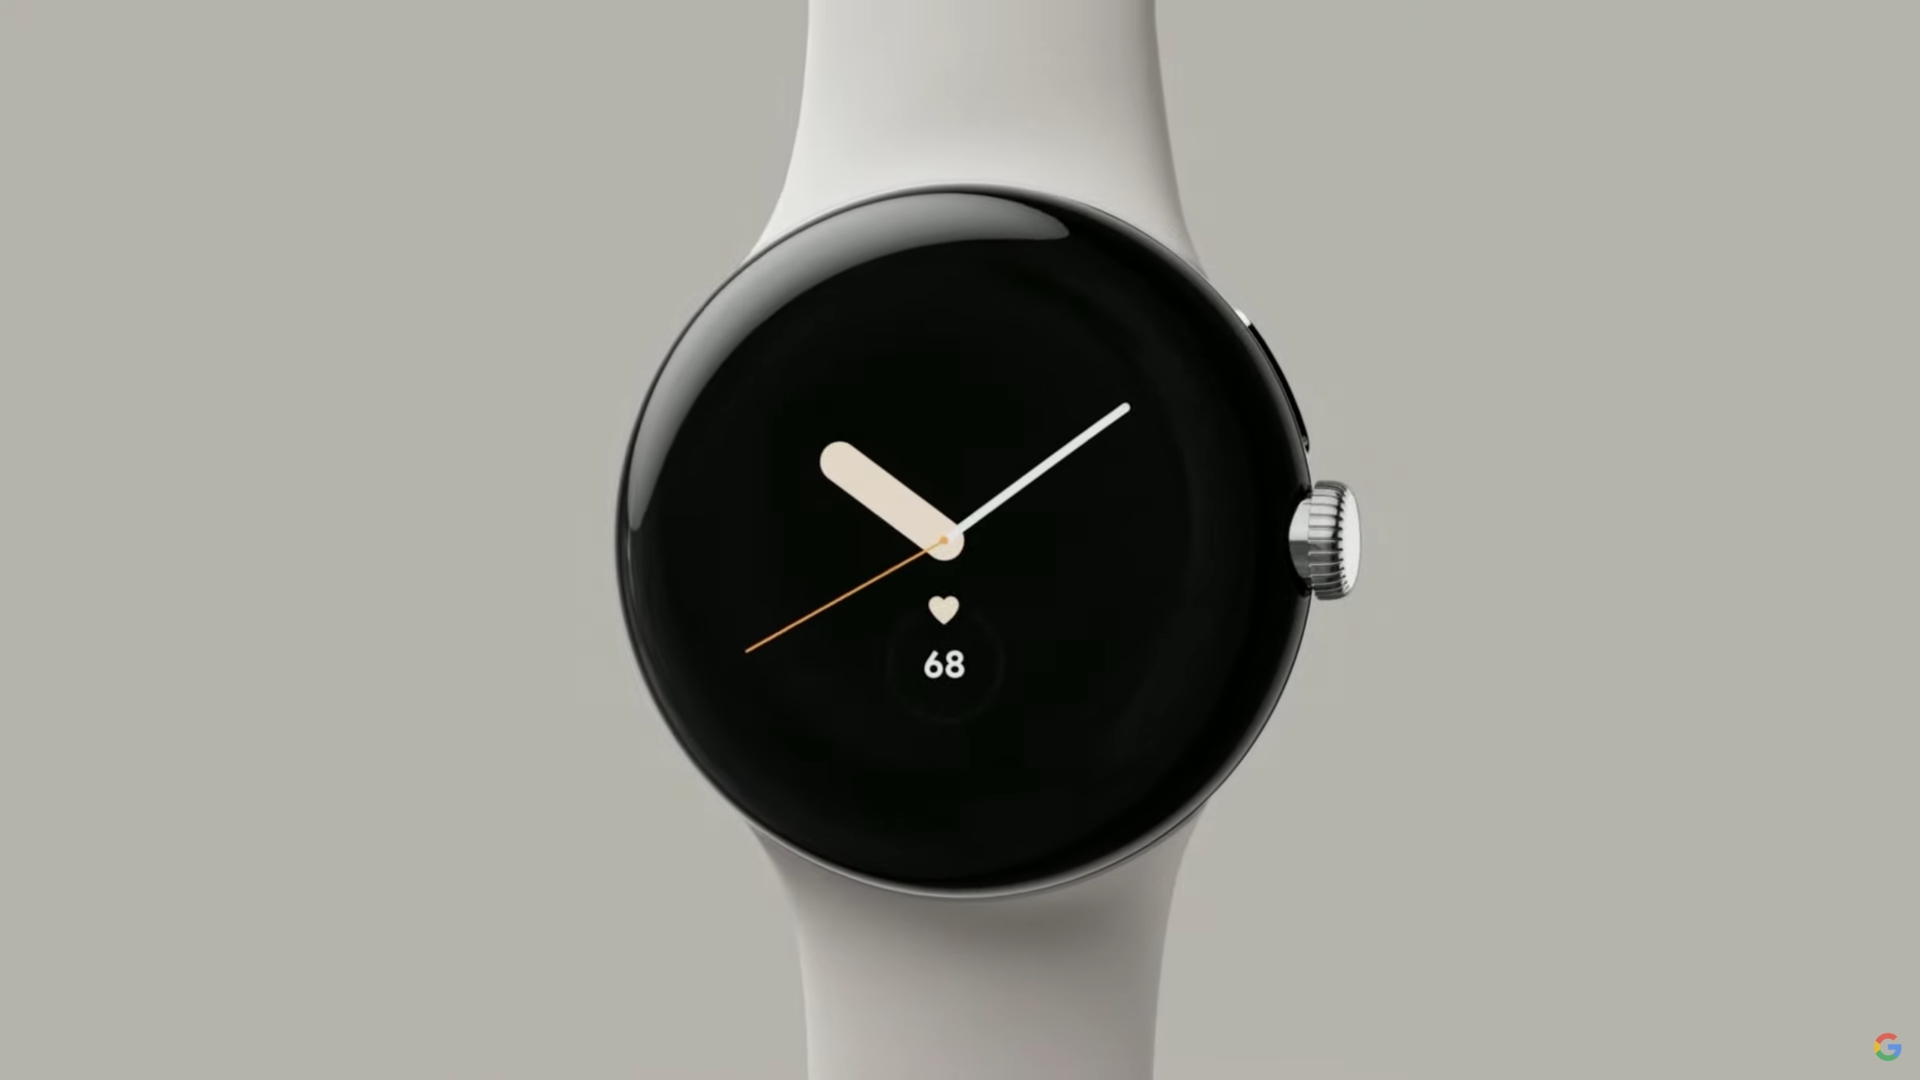 A Google Pixel Watch against a white surface.